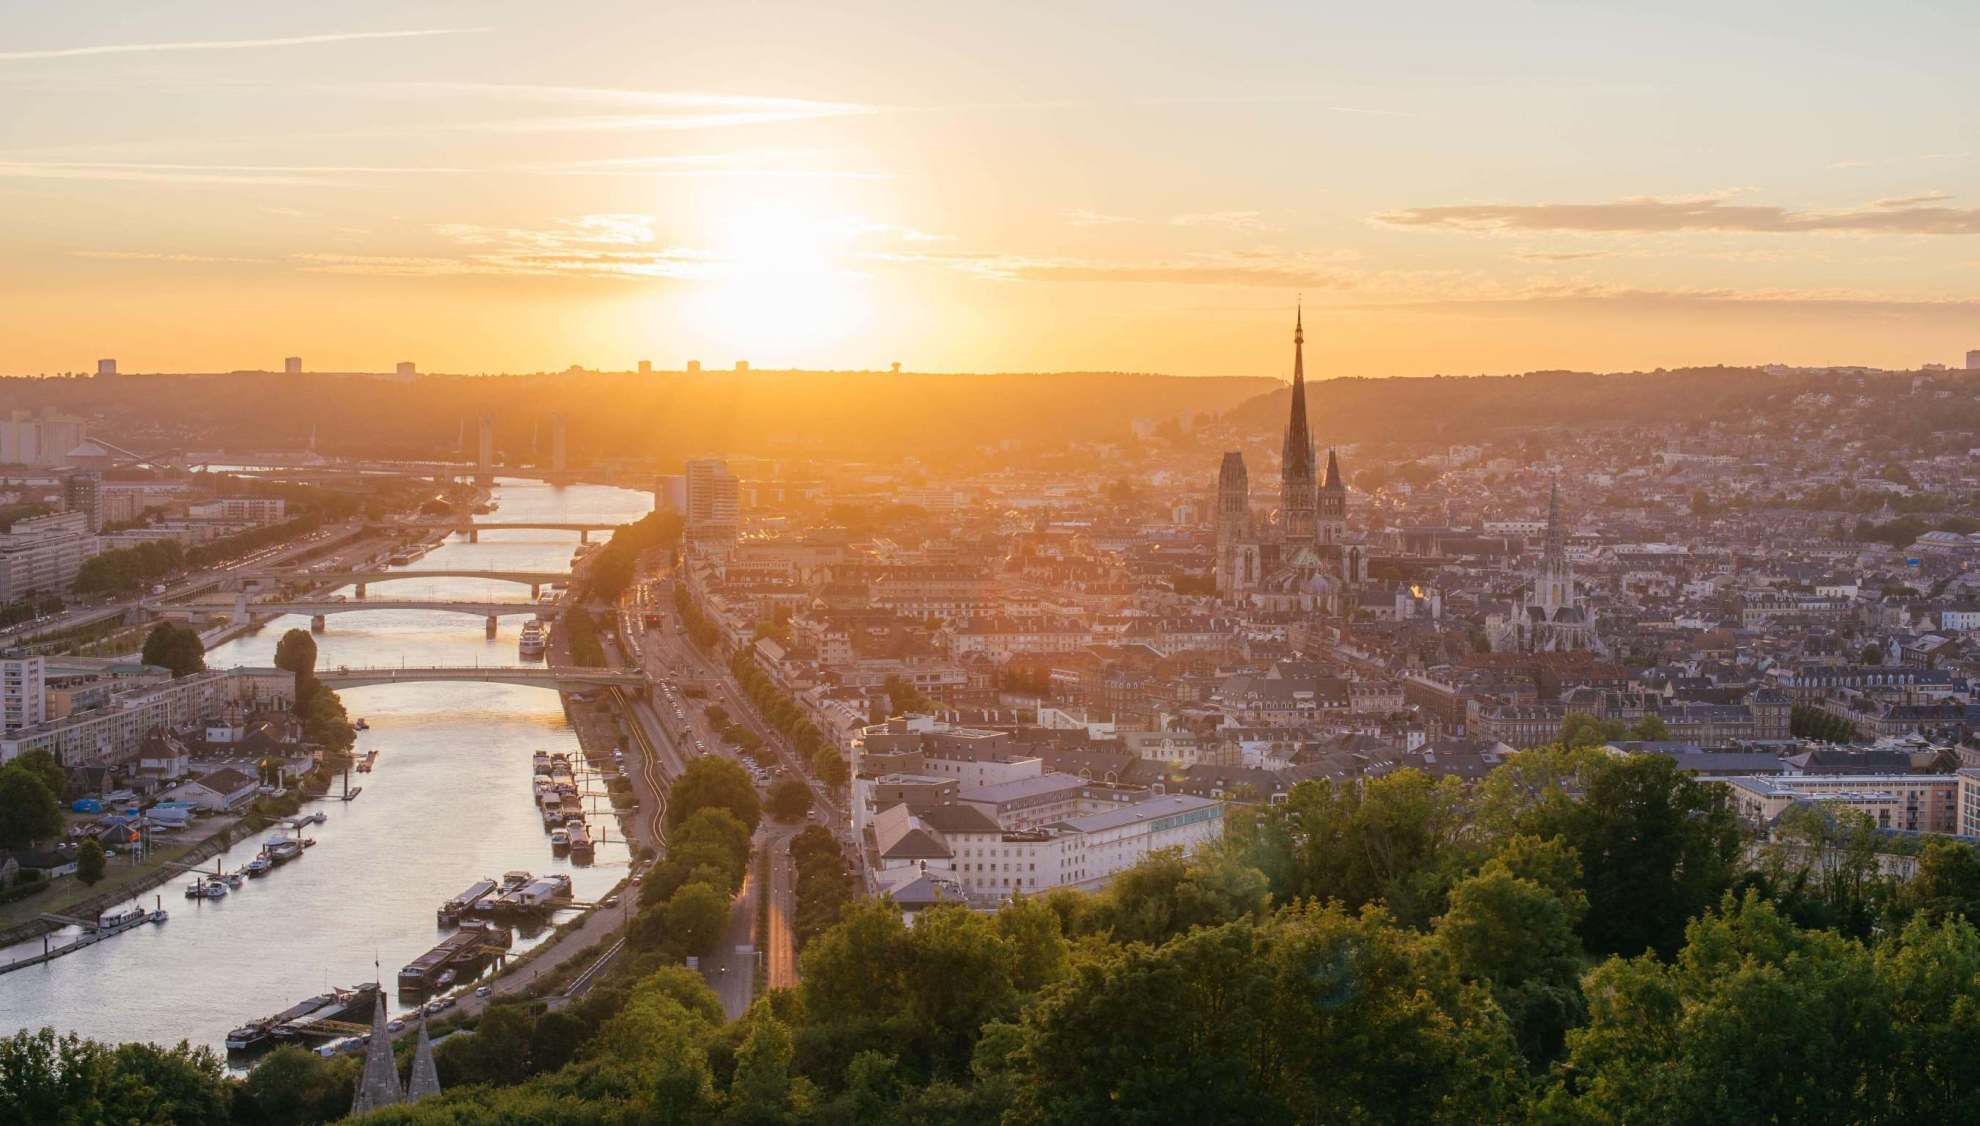 A view of Rouen at sunset with the silhouette of the cathedral overlooking the river Seine